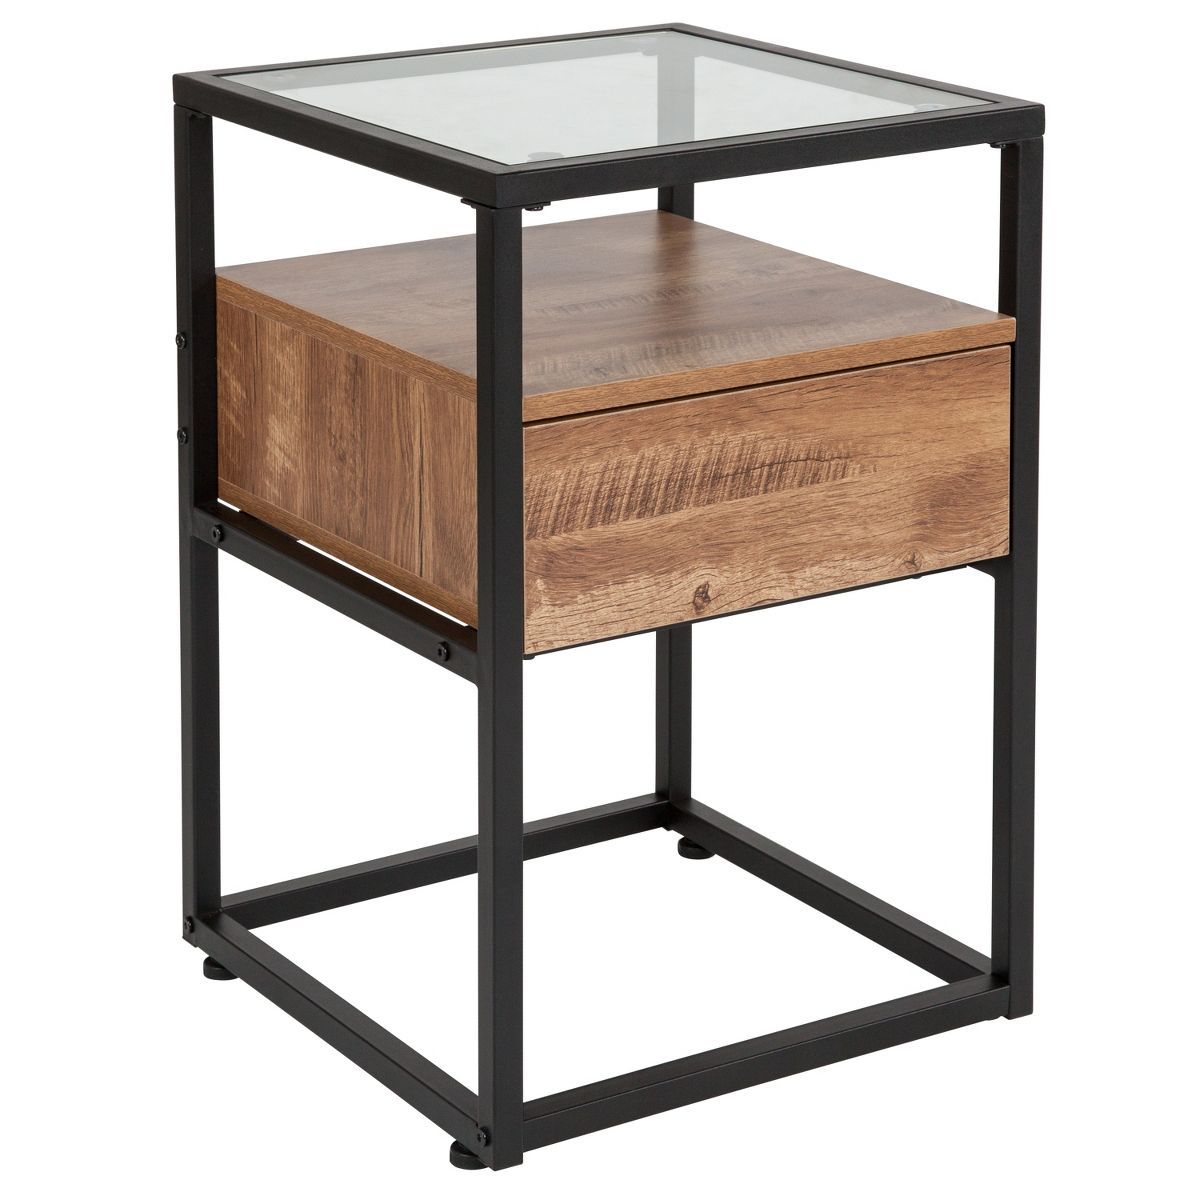 Emma and Oliver Glass End Table with Drawer and Shelf in Rustic Wood Grain Finish | Target